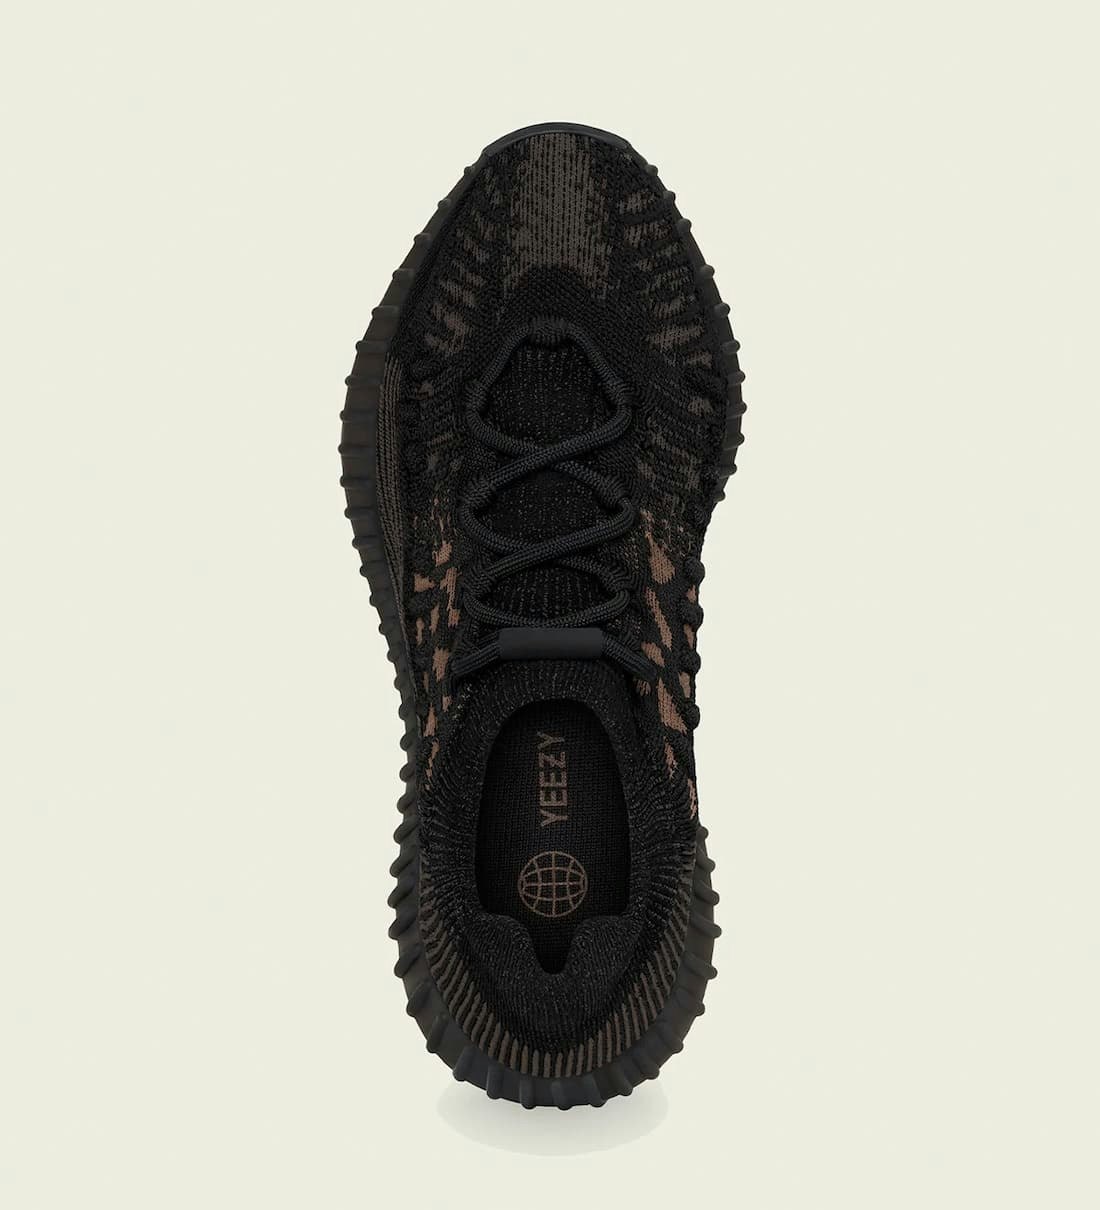 adidas YEEZY Boost 350 V2 CMPCT “Slate Carbon”